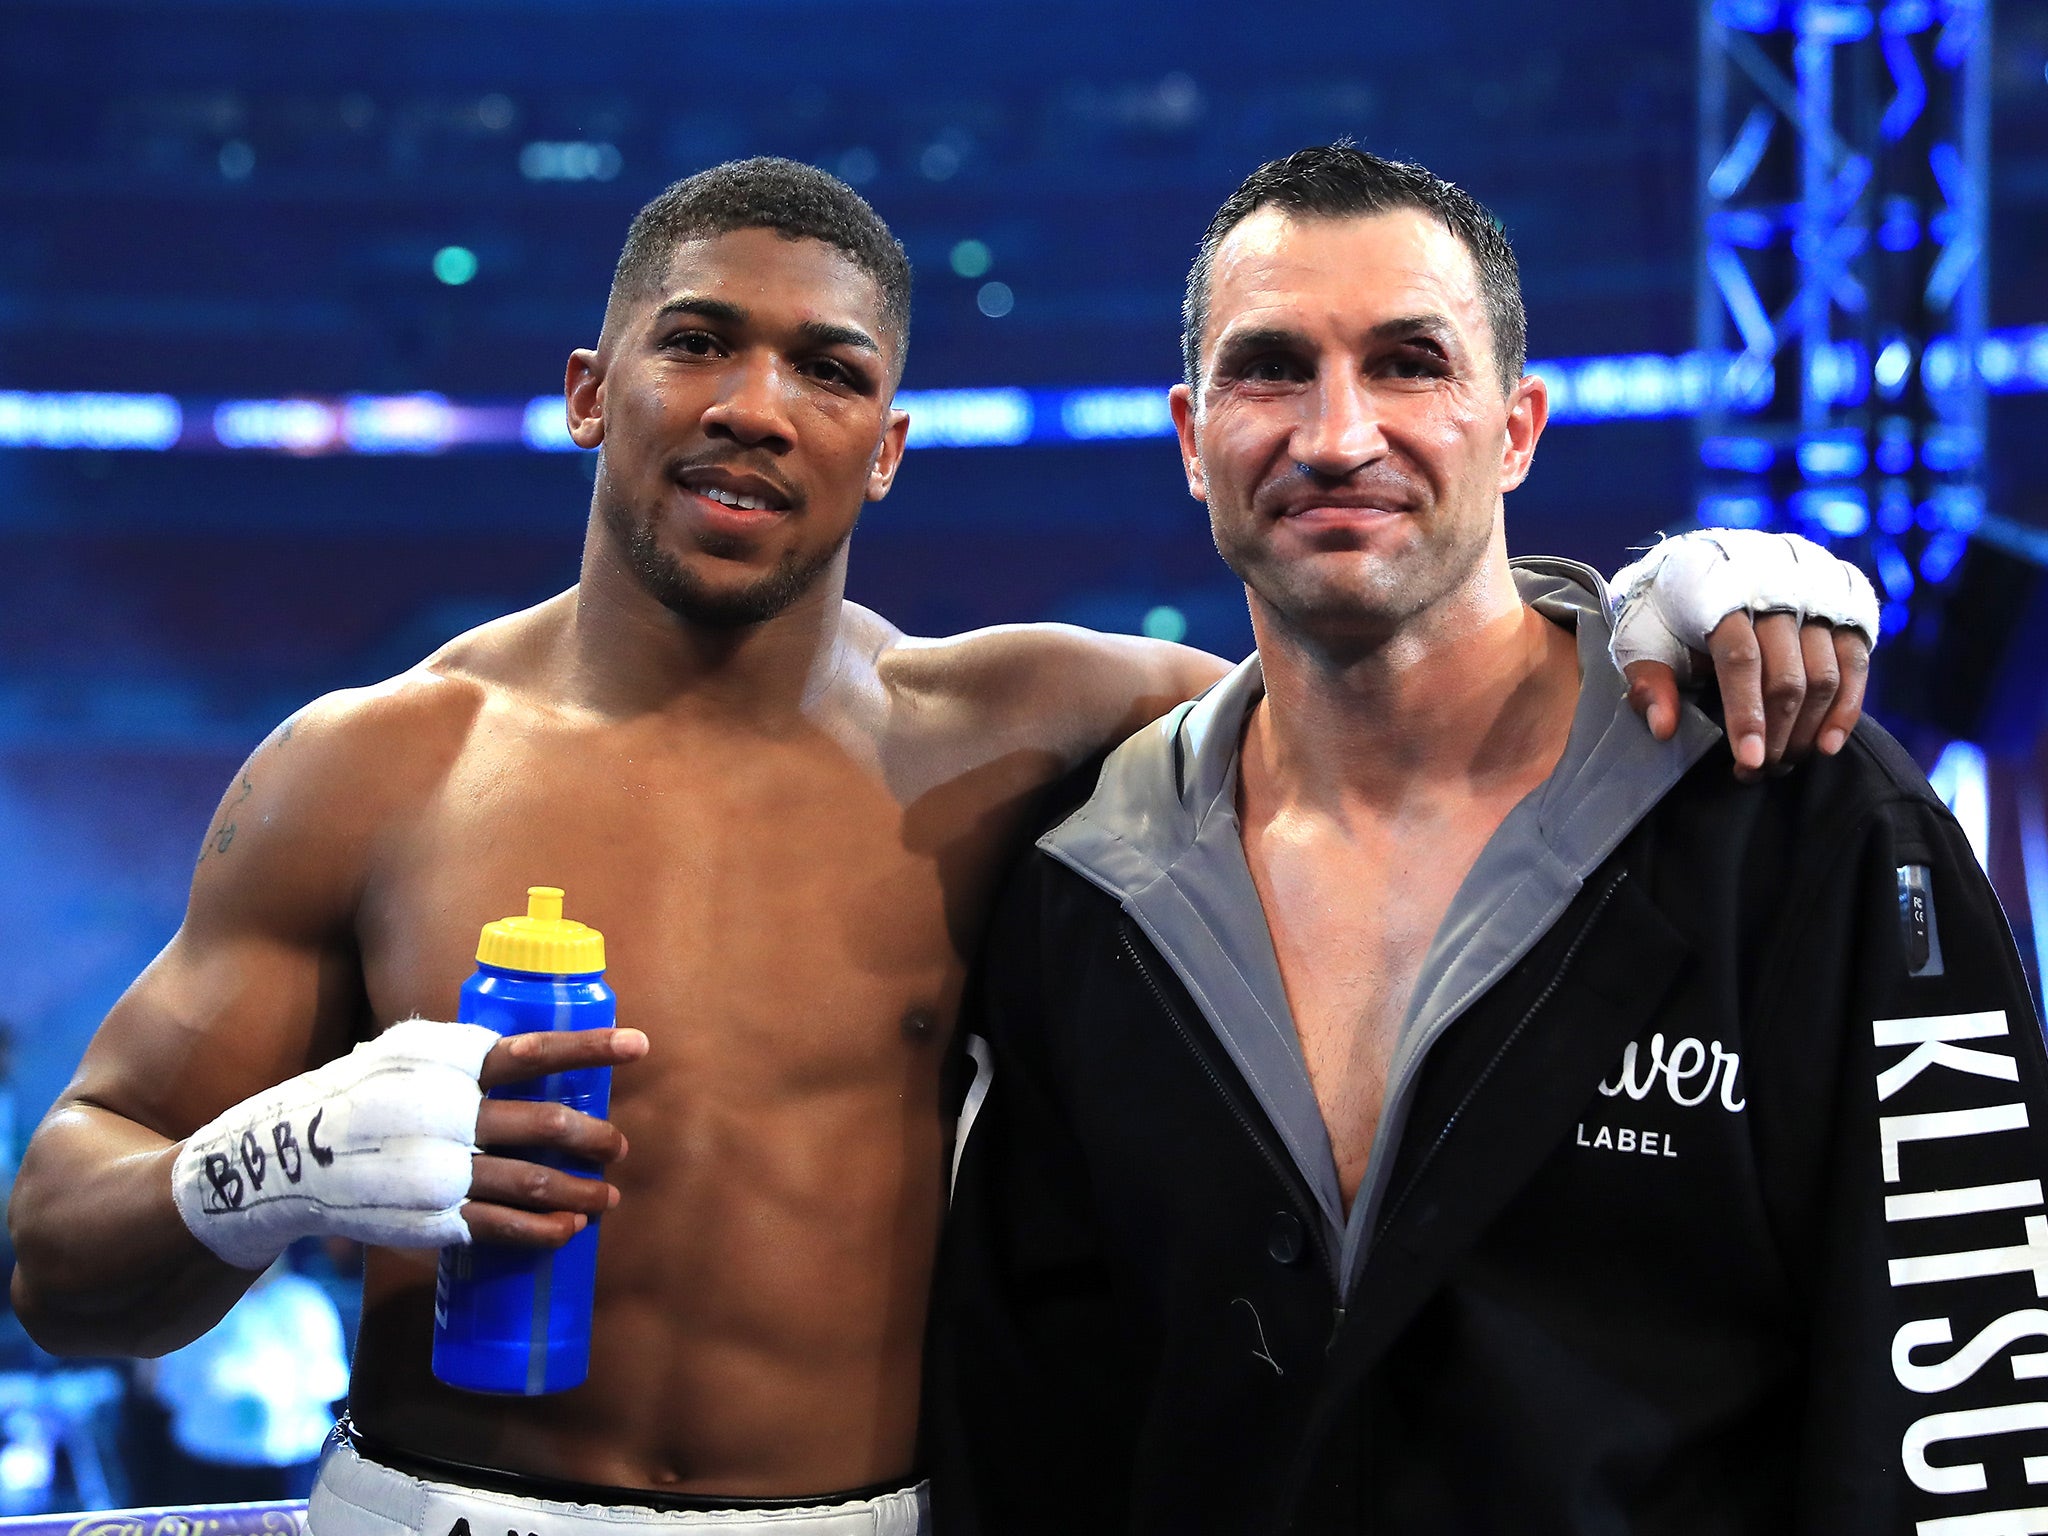 Wladimir Klitschko is expected to trigger the rematch clause in his contract and face Anthony Joshua again